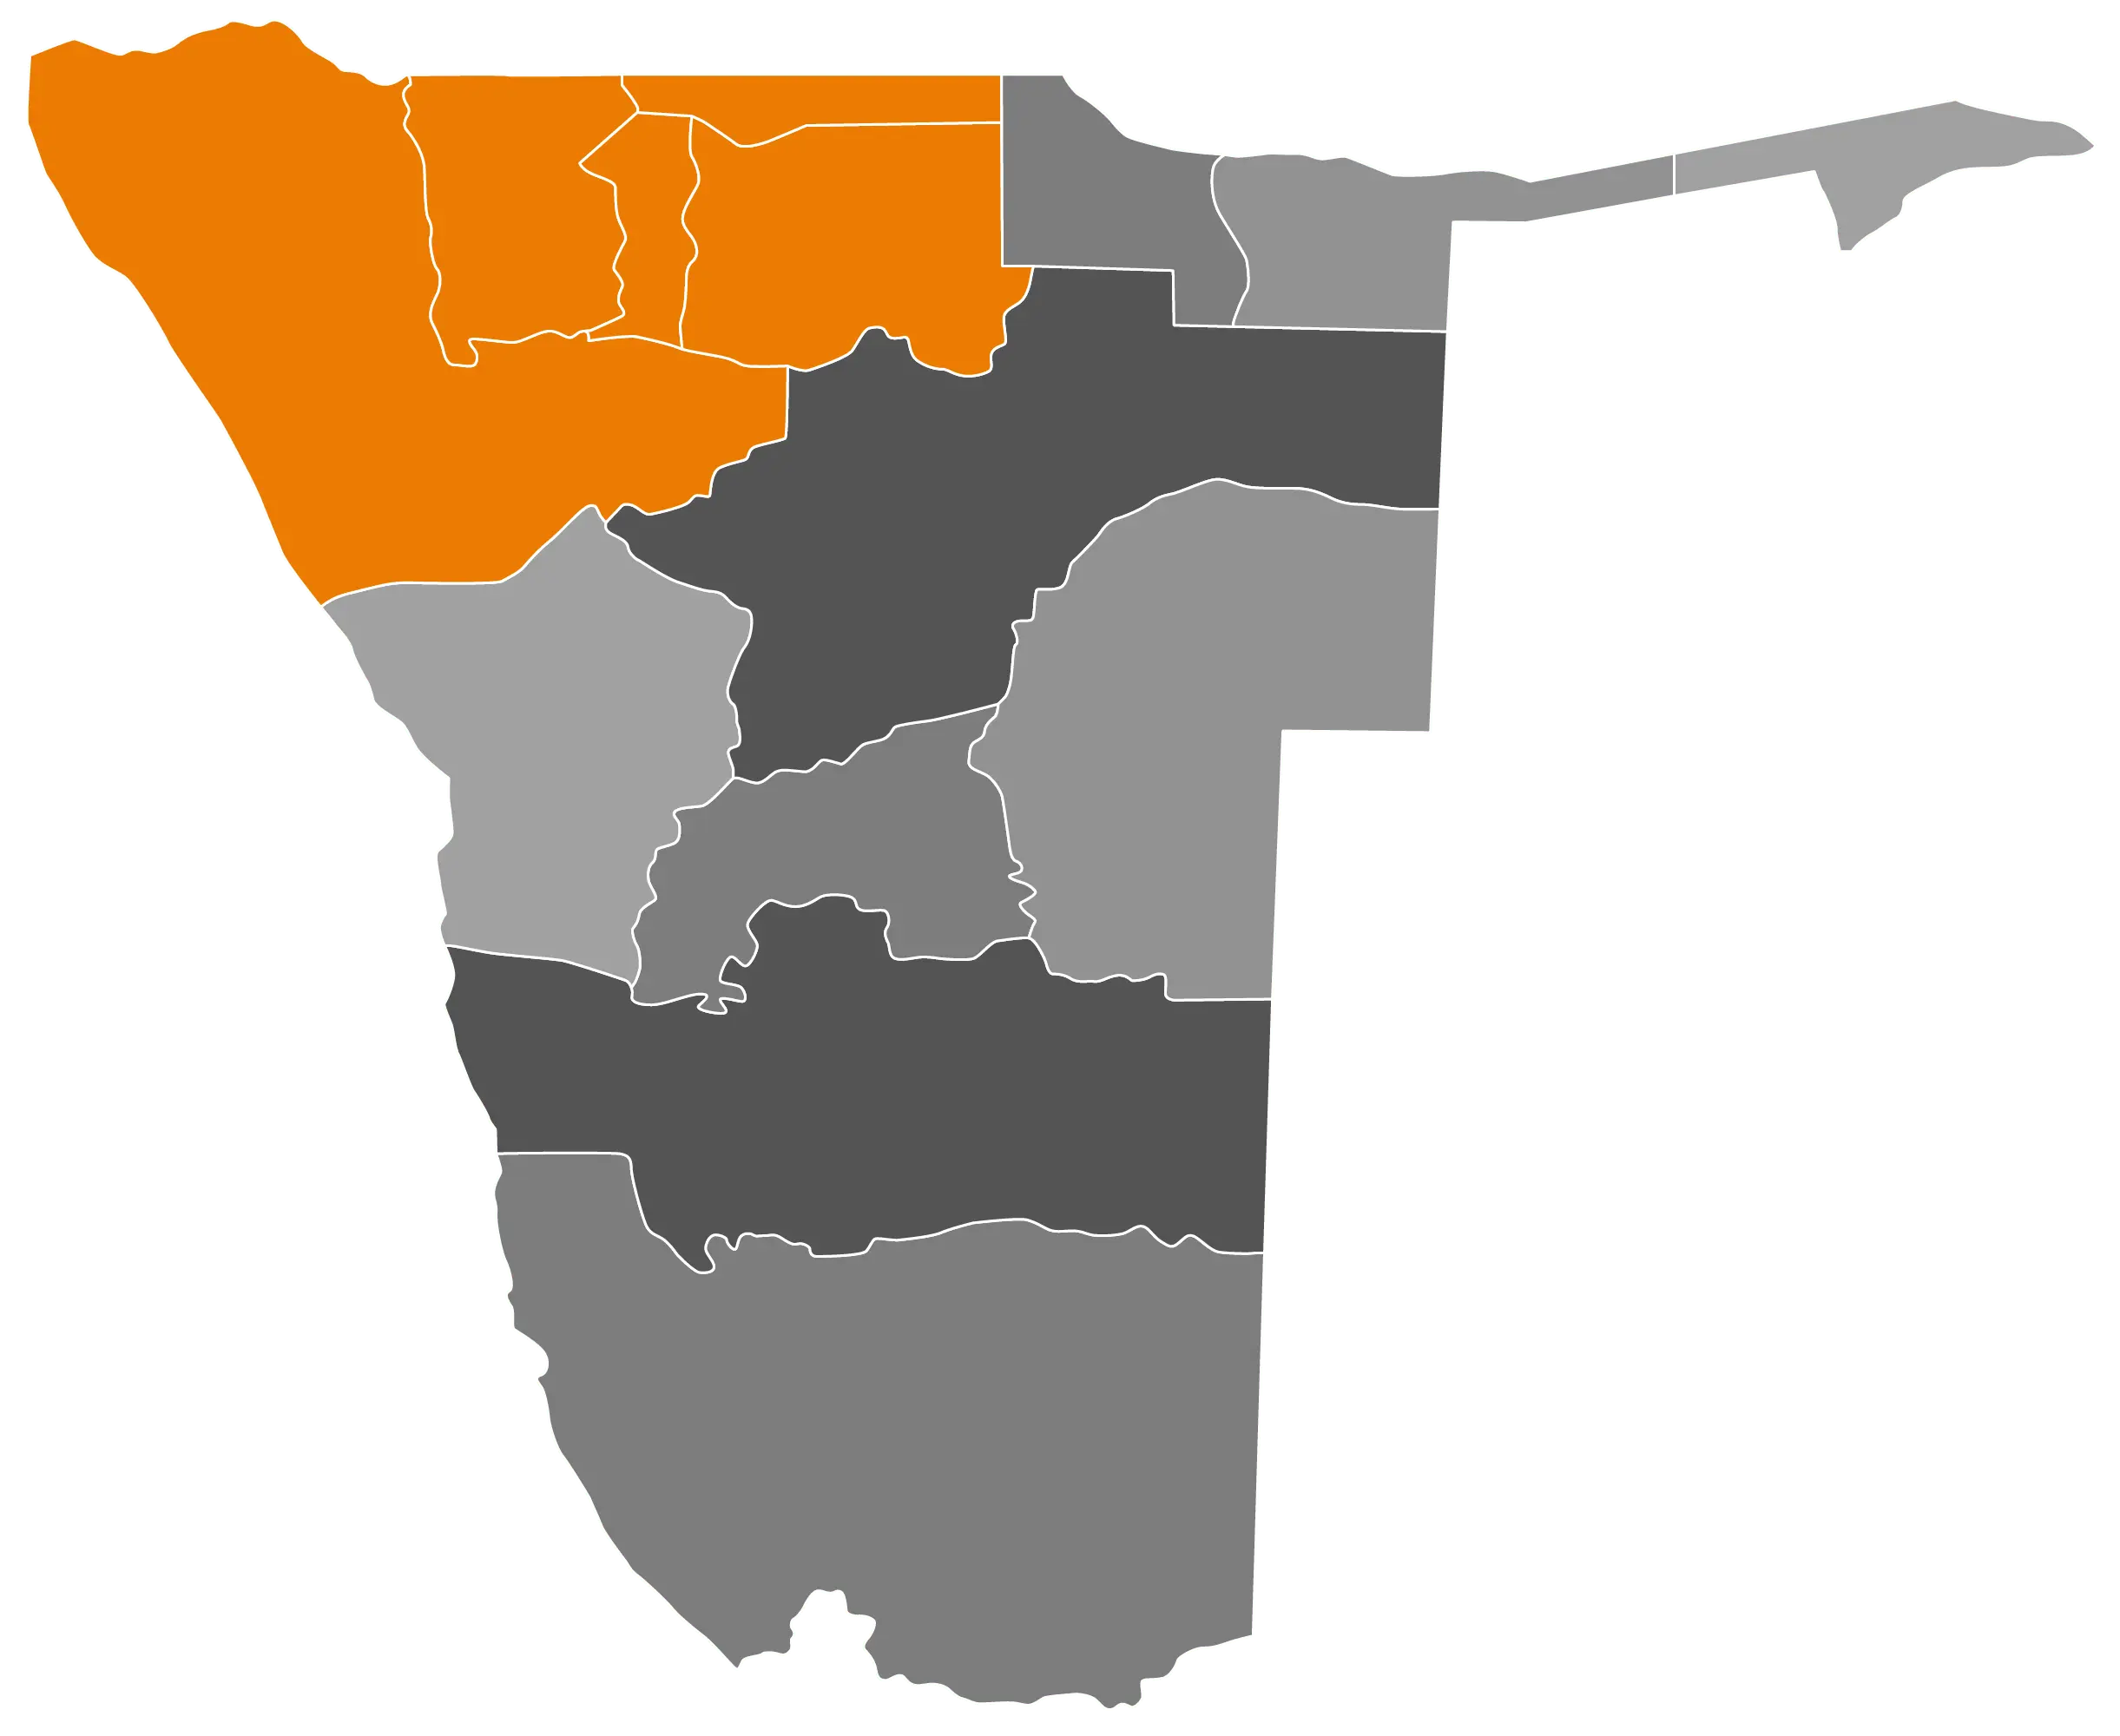 The Ecohunter | map of namibia | nord-west region highlighted orange